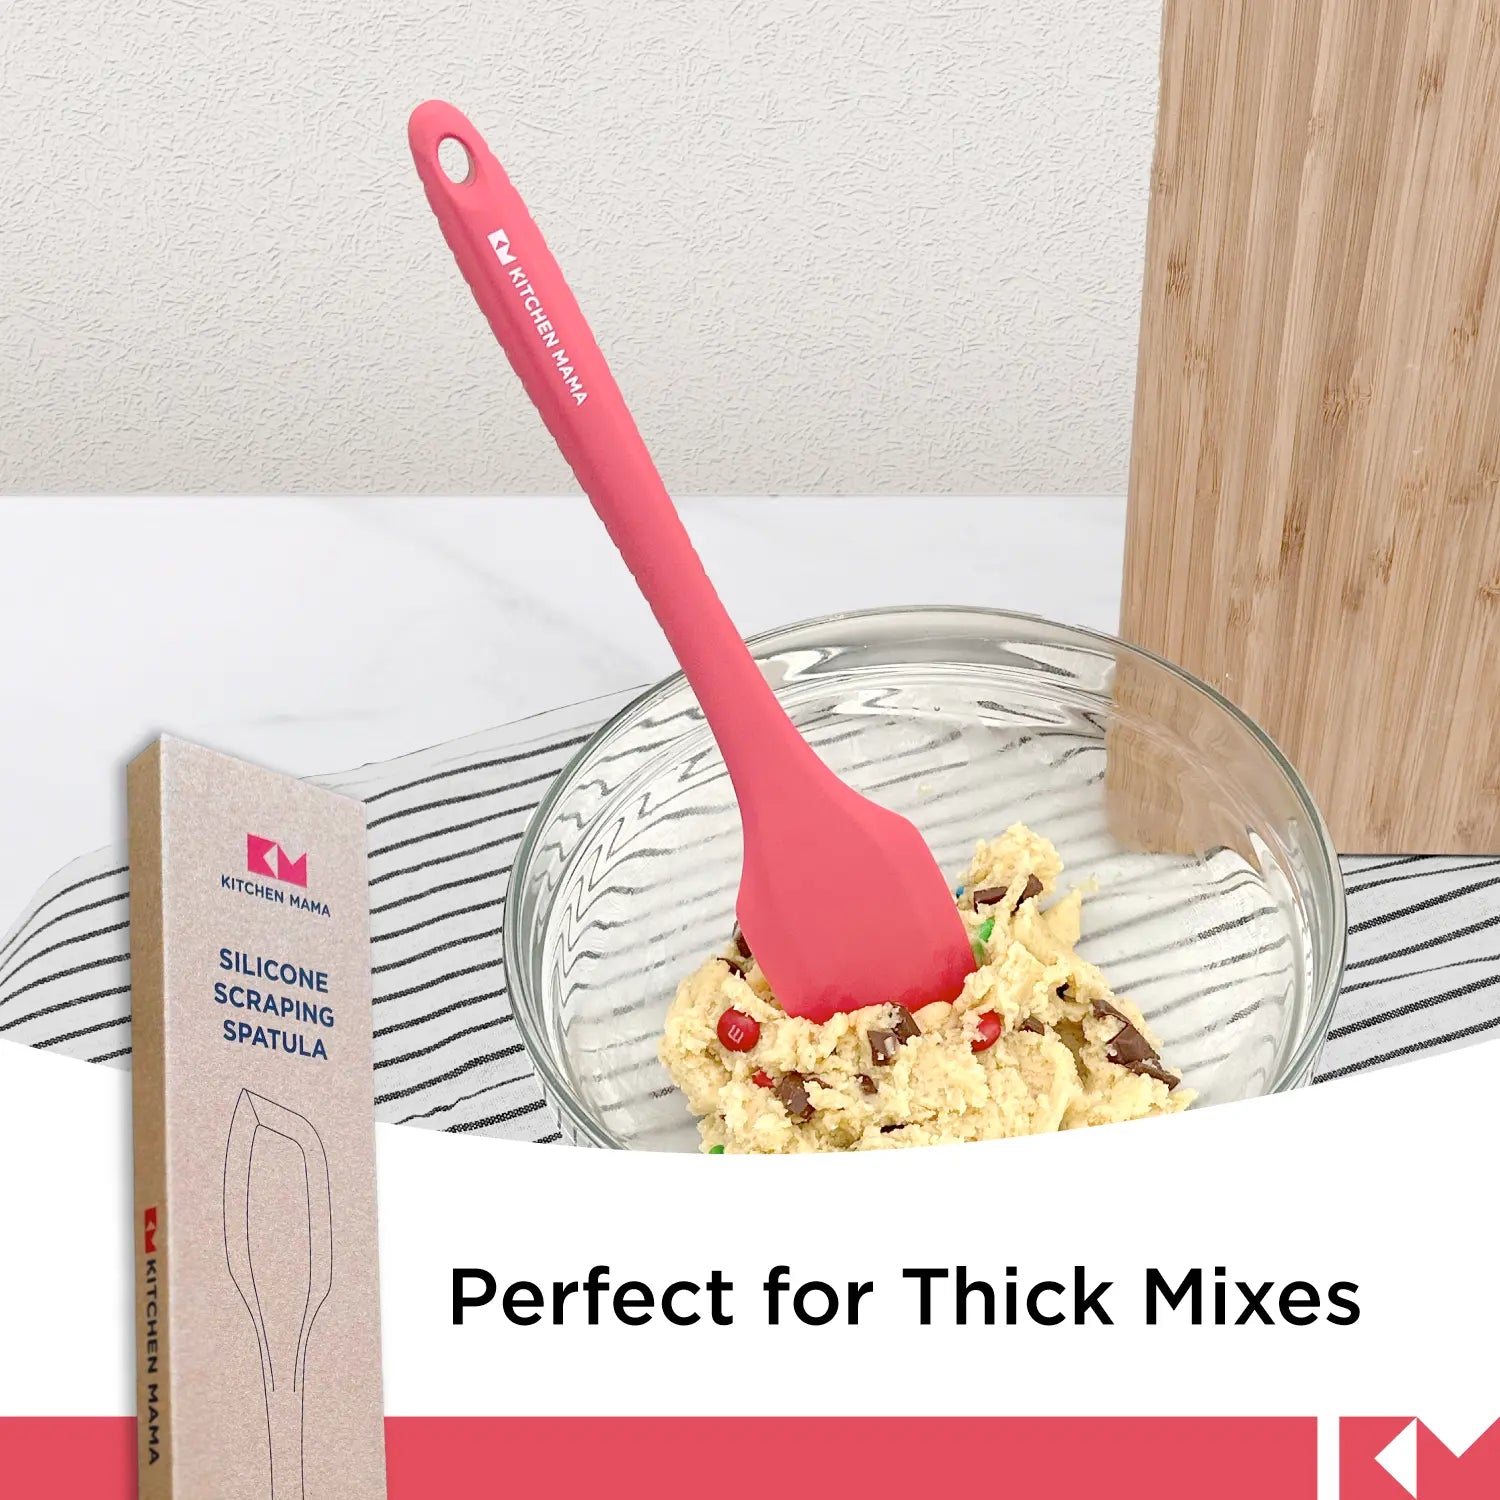 Kitchen Mama Silicone Scraping Spatula, Red, SP0310-R, perfect for thick mixes